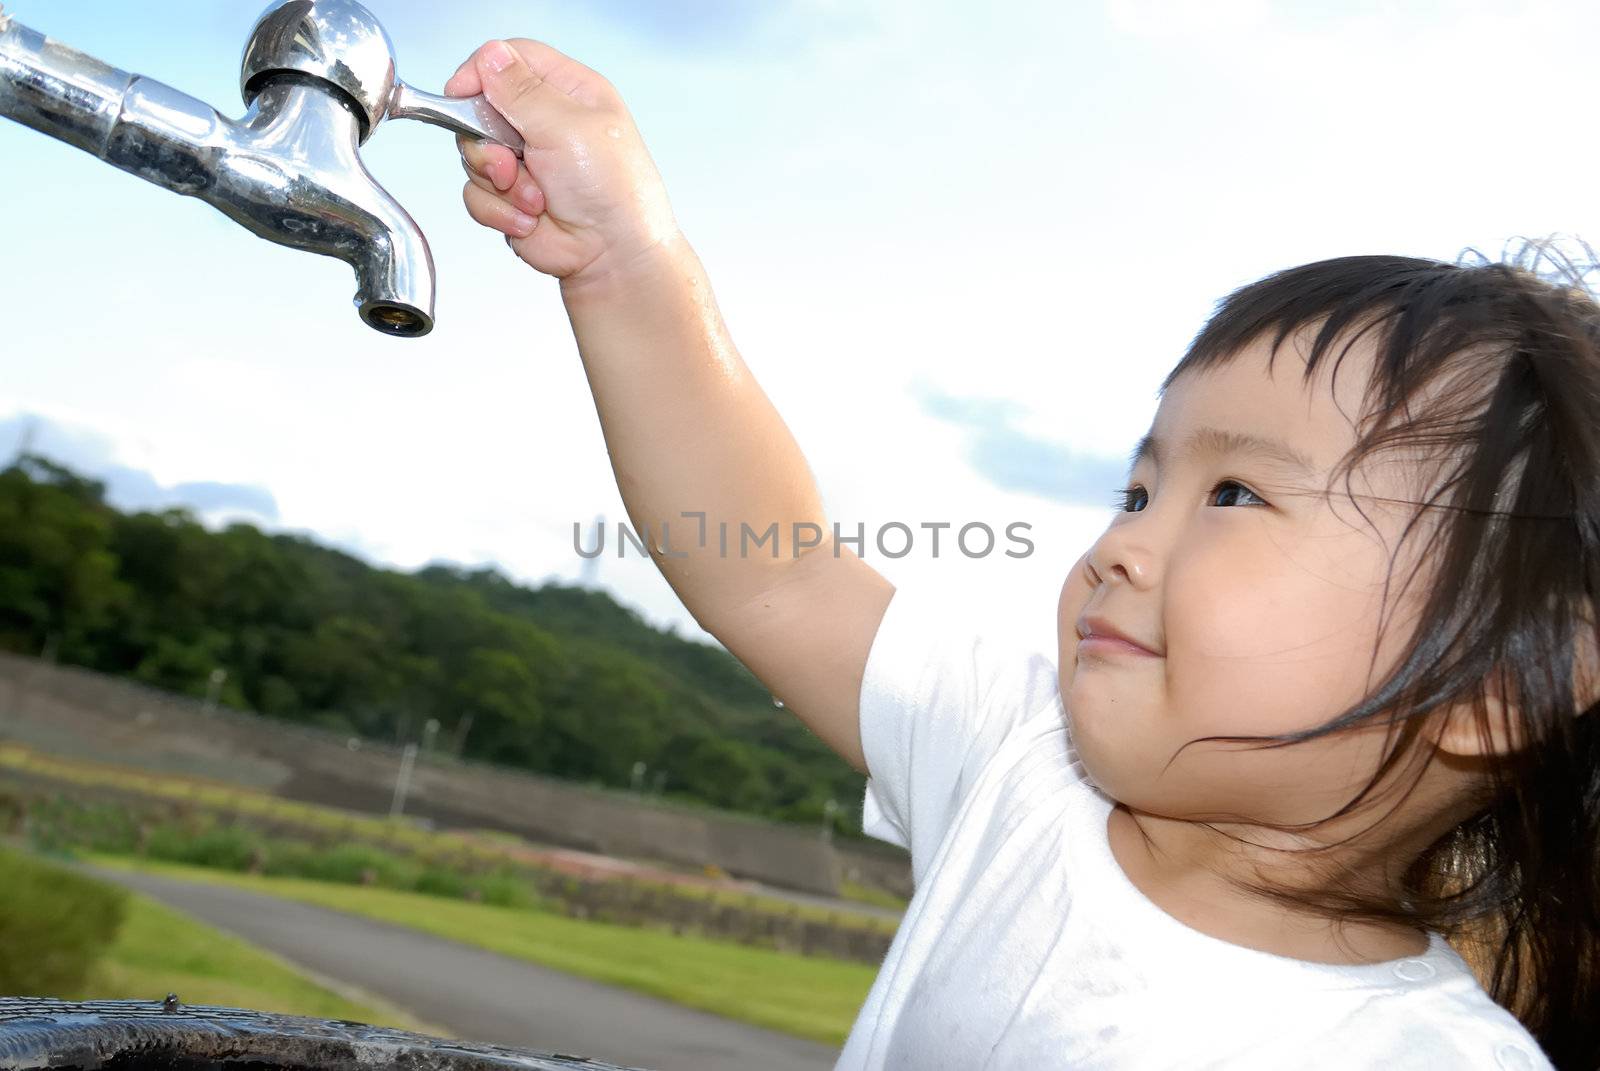 baby wash hand and turn off faucet in the outdoor by elwynn